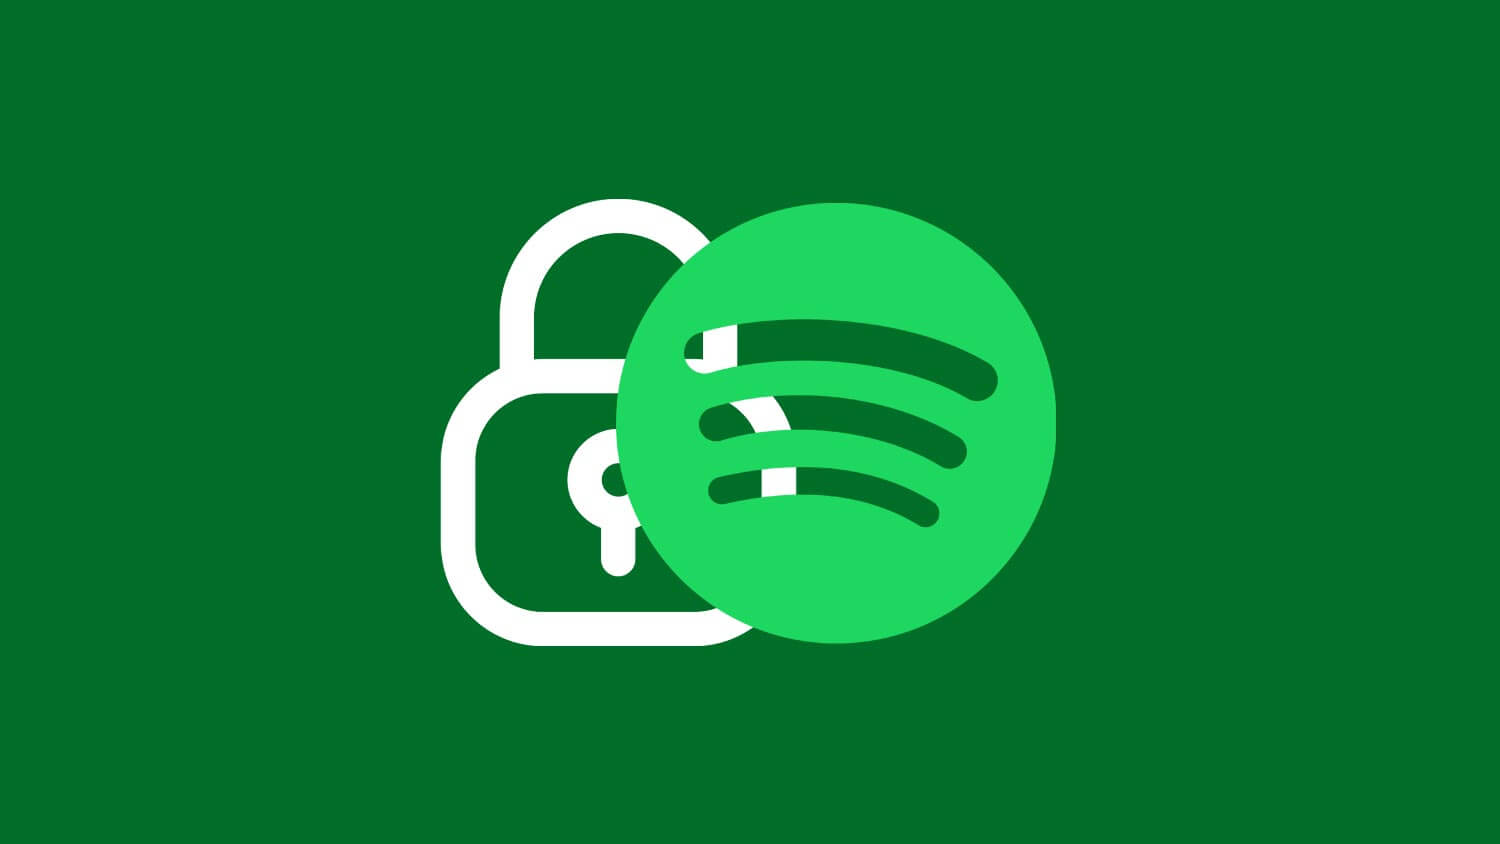 private listening spotify